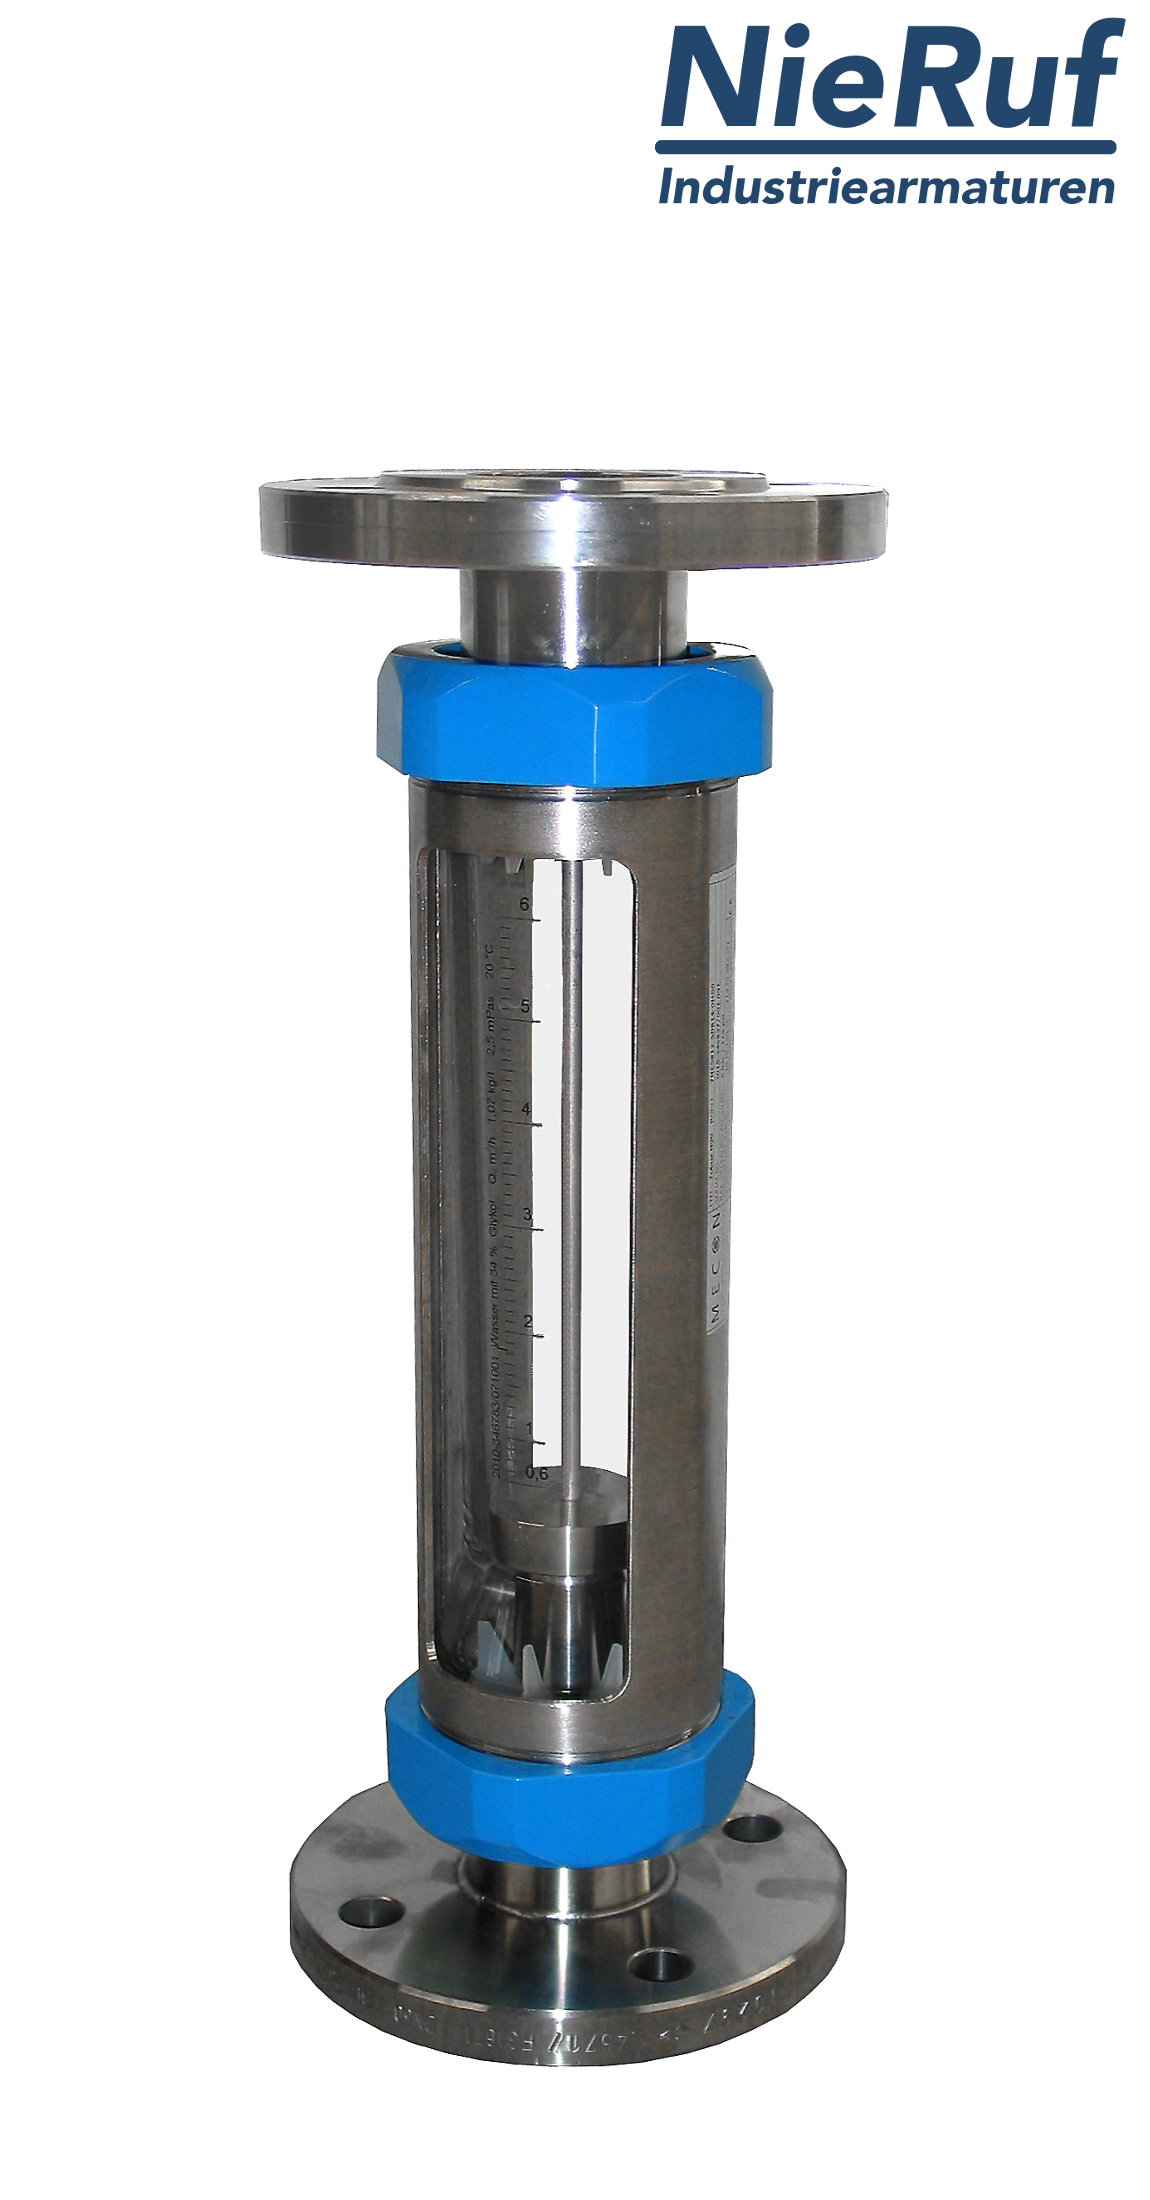 Variable area flowmeter stainless steel + borosilicate flange DN32 200.0 - 2000 l/h water FKM